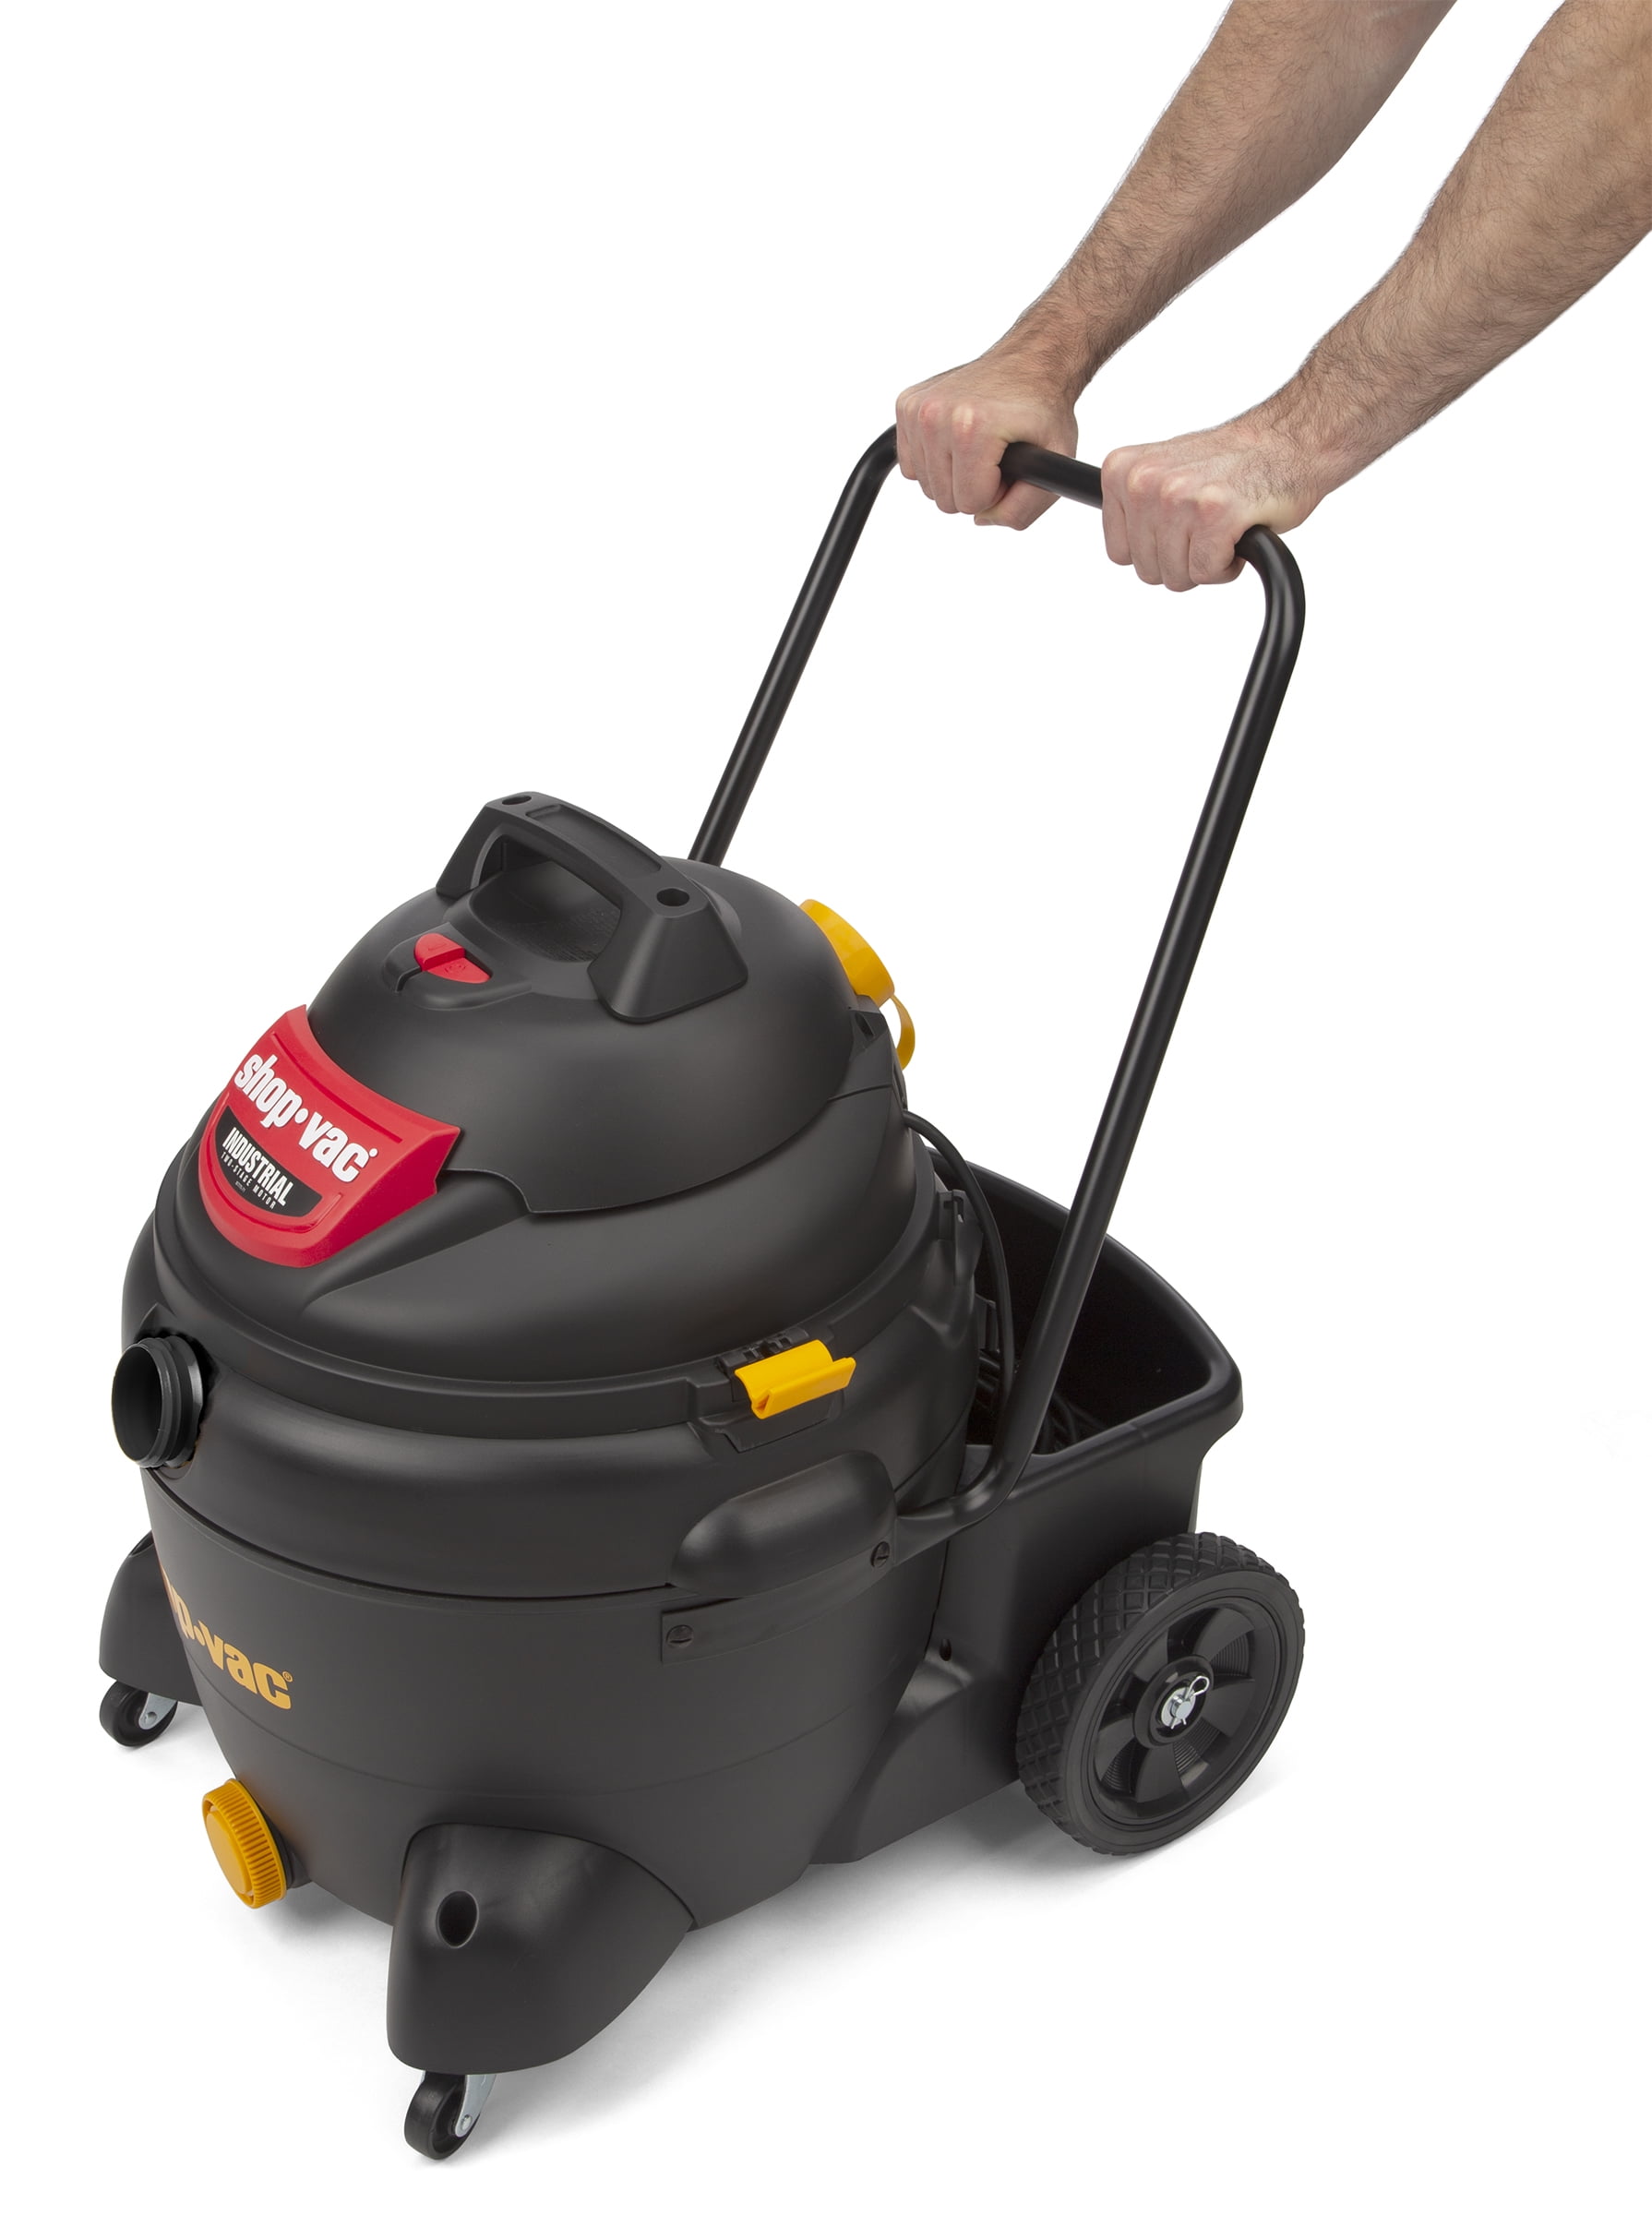 Shop-Vac 16 Gallon 3.0 Peak HP Two-Stage Industrial Wet Dry Vac, 9593406 